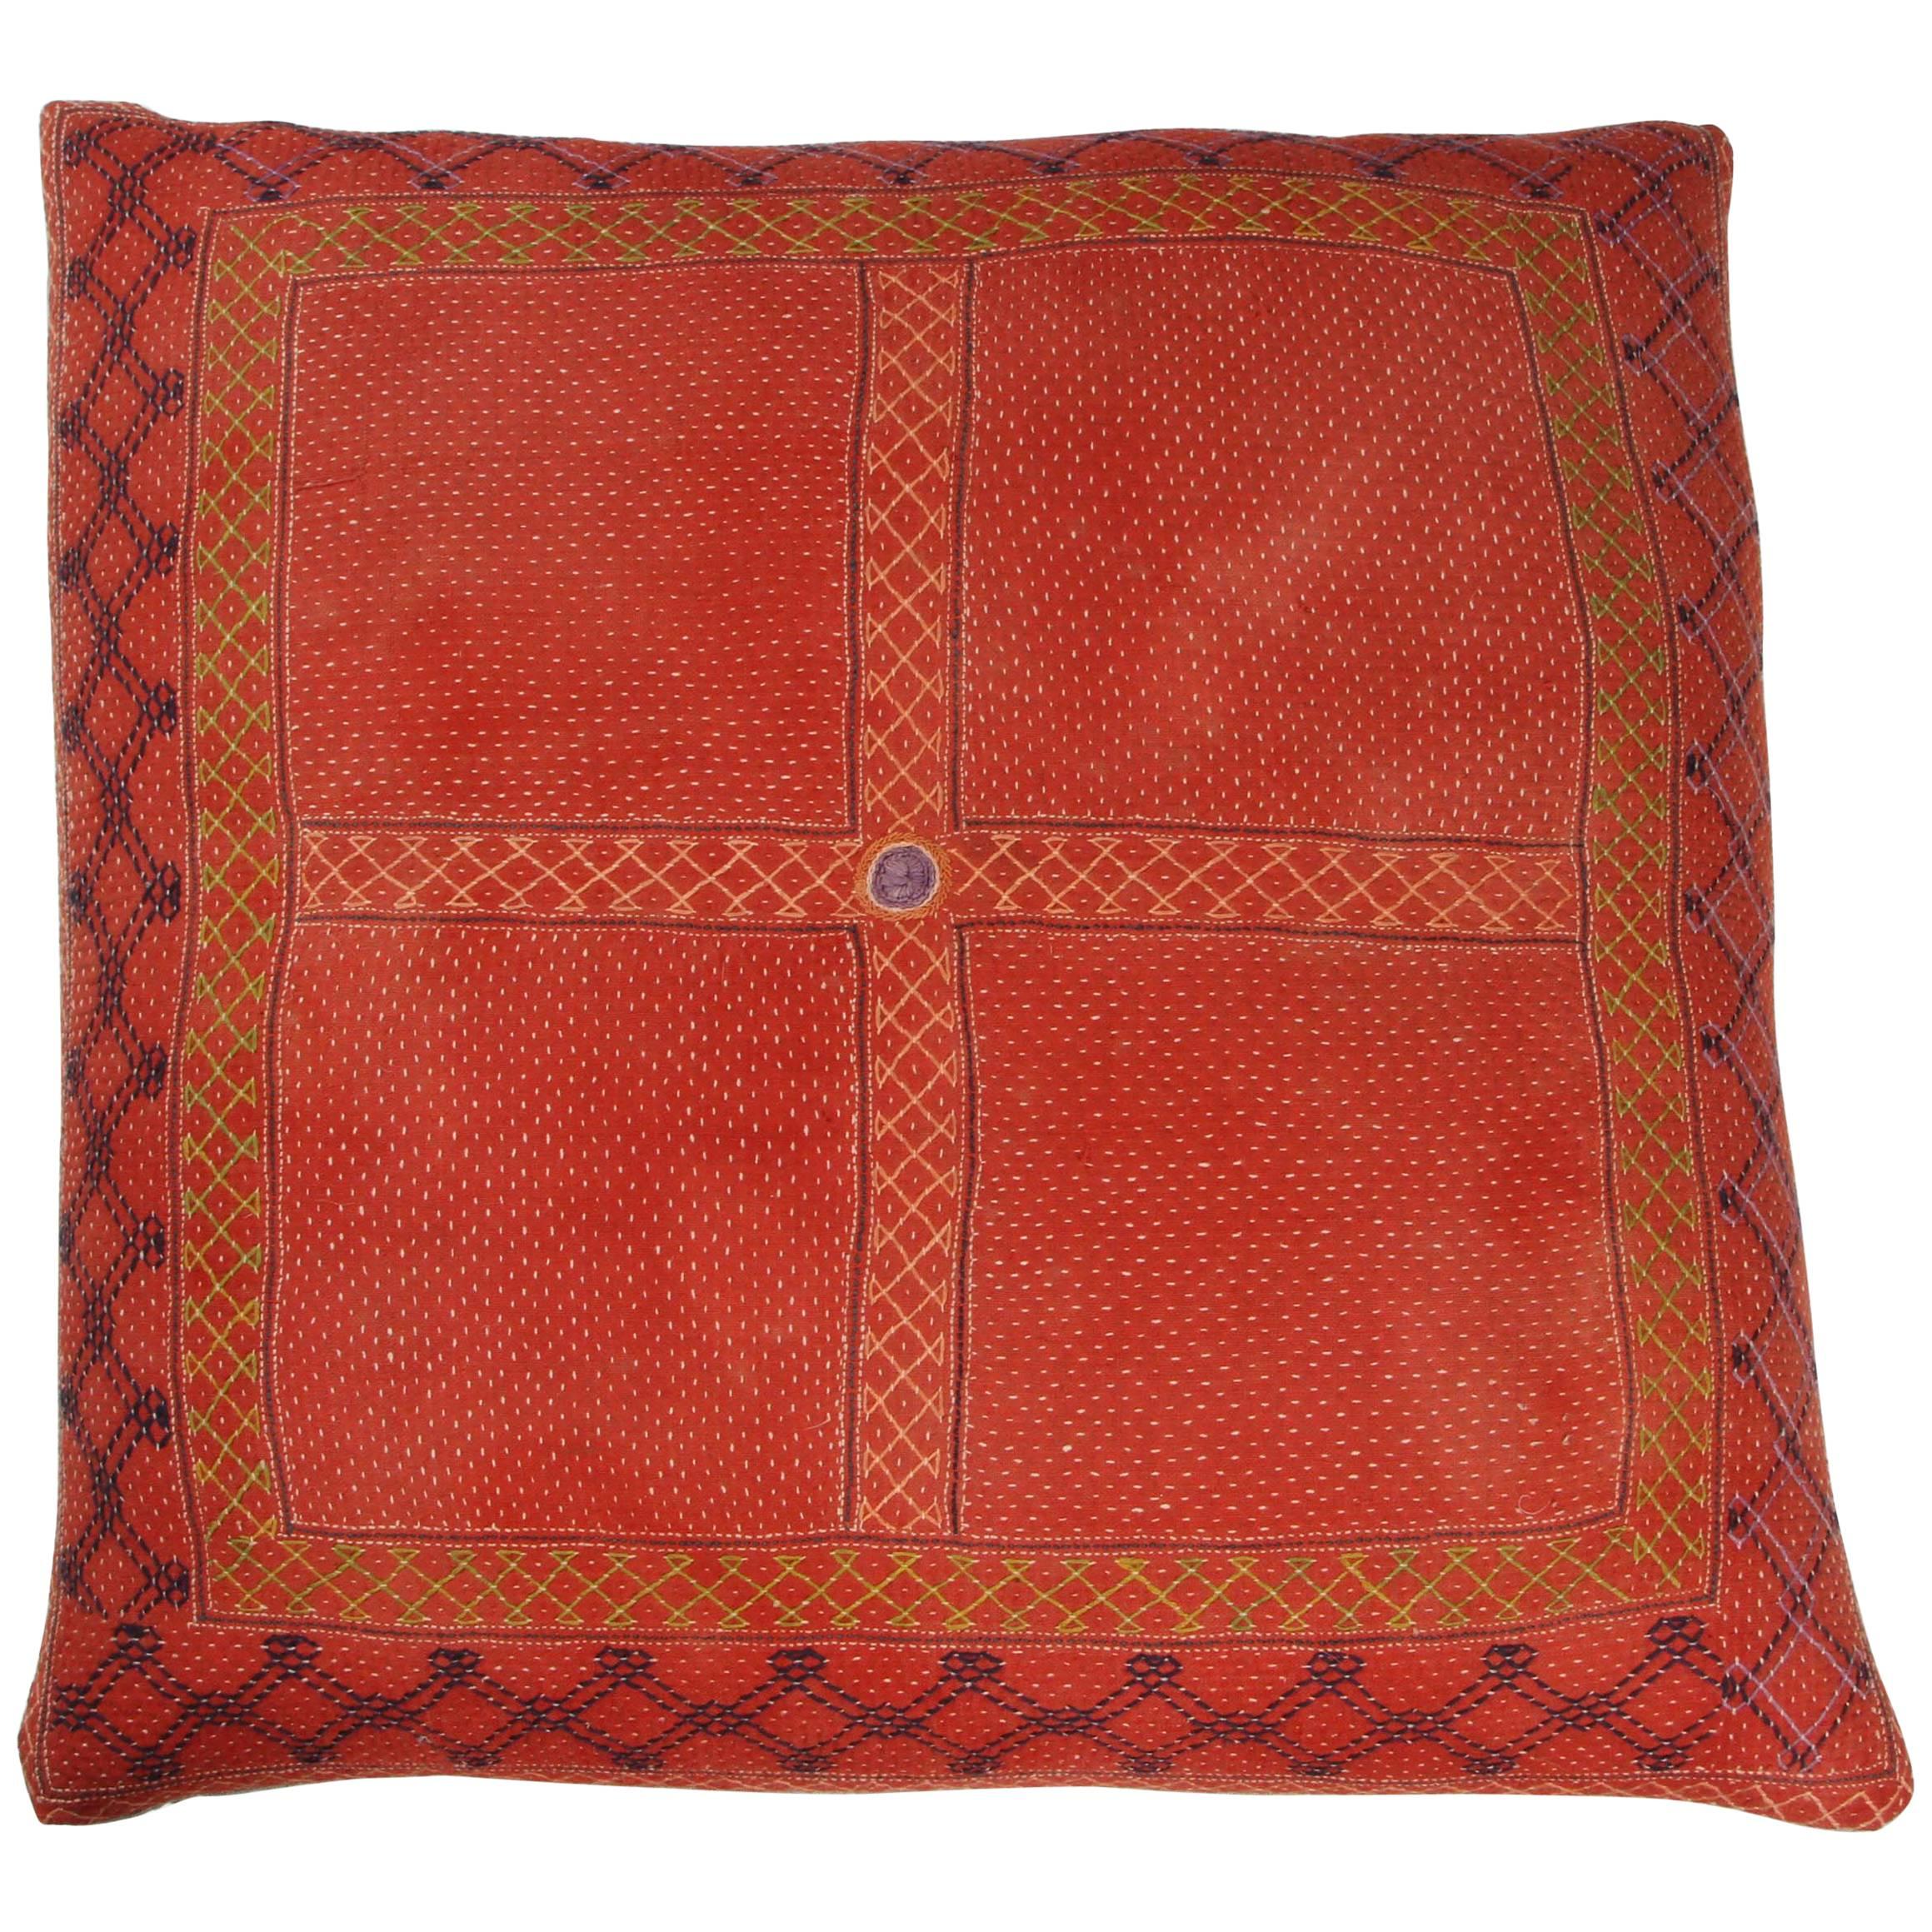 Indian Banjara Cotton Bag Face Pillow, Orange-Red, Yellow and Blue For Sale